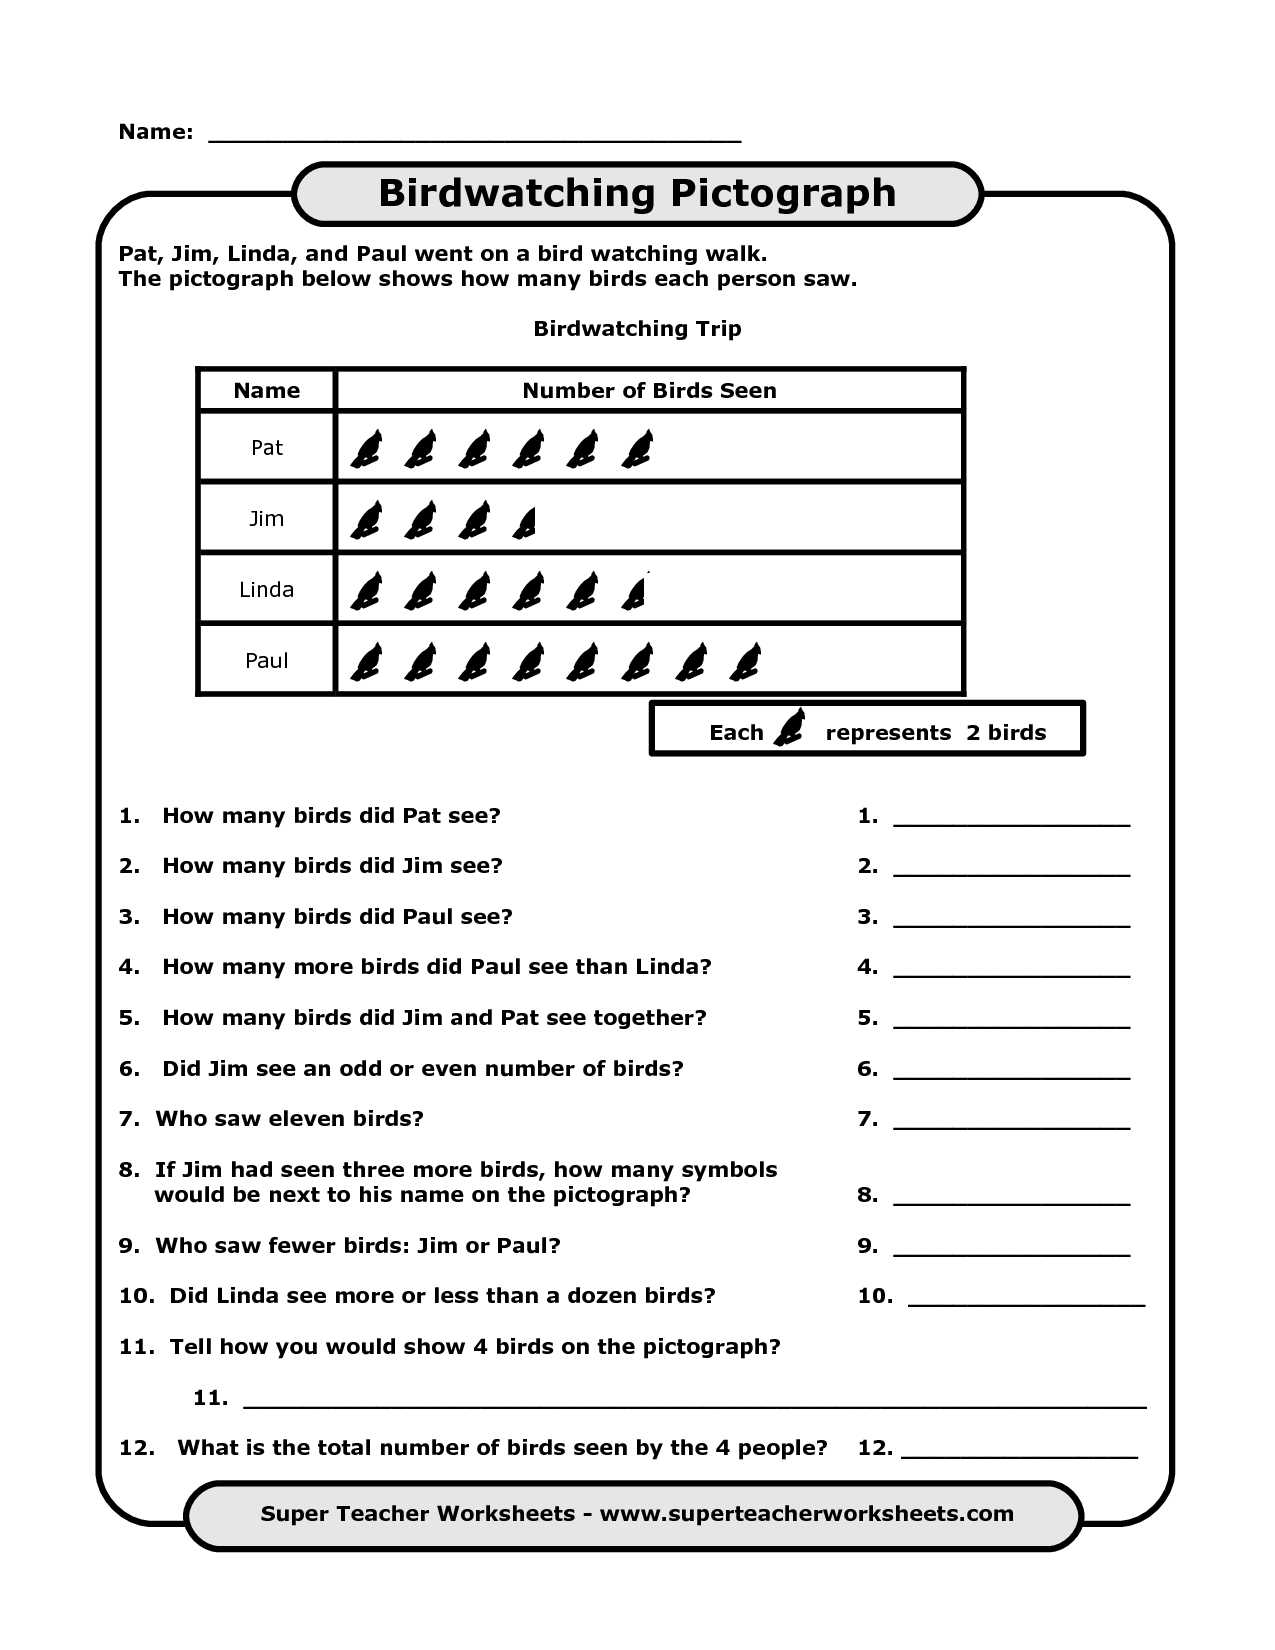 14 Best Images of Free Pictograph Worksheets Pictograph Worksheets